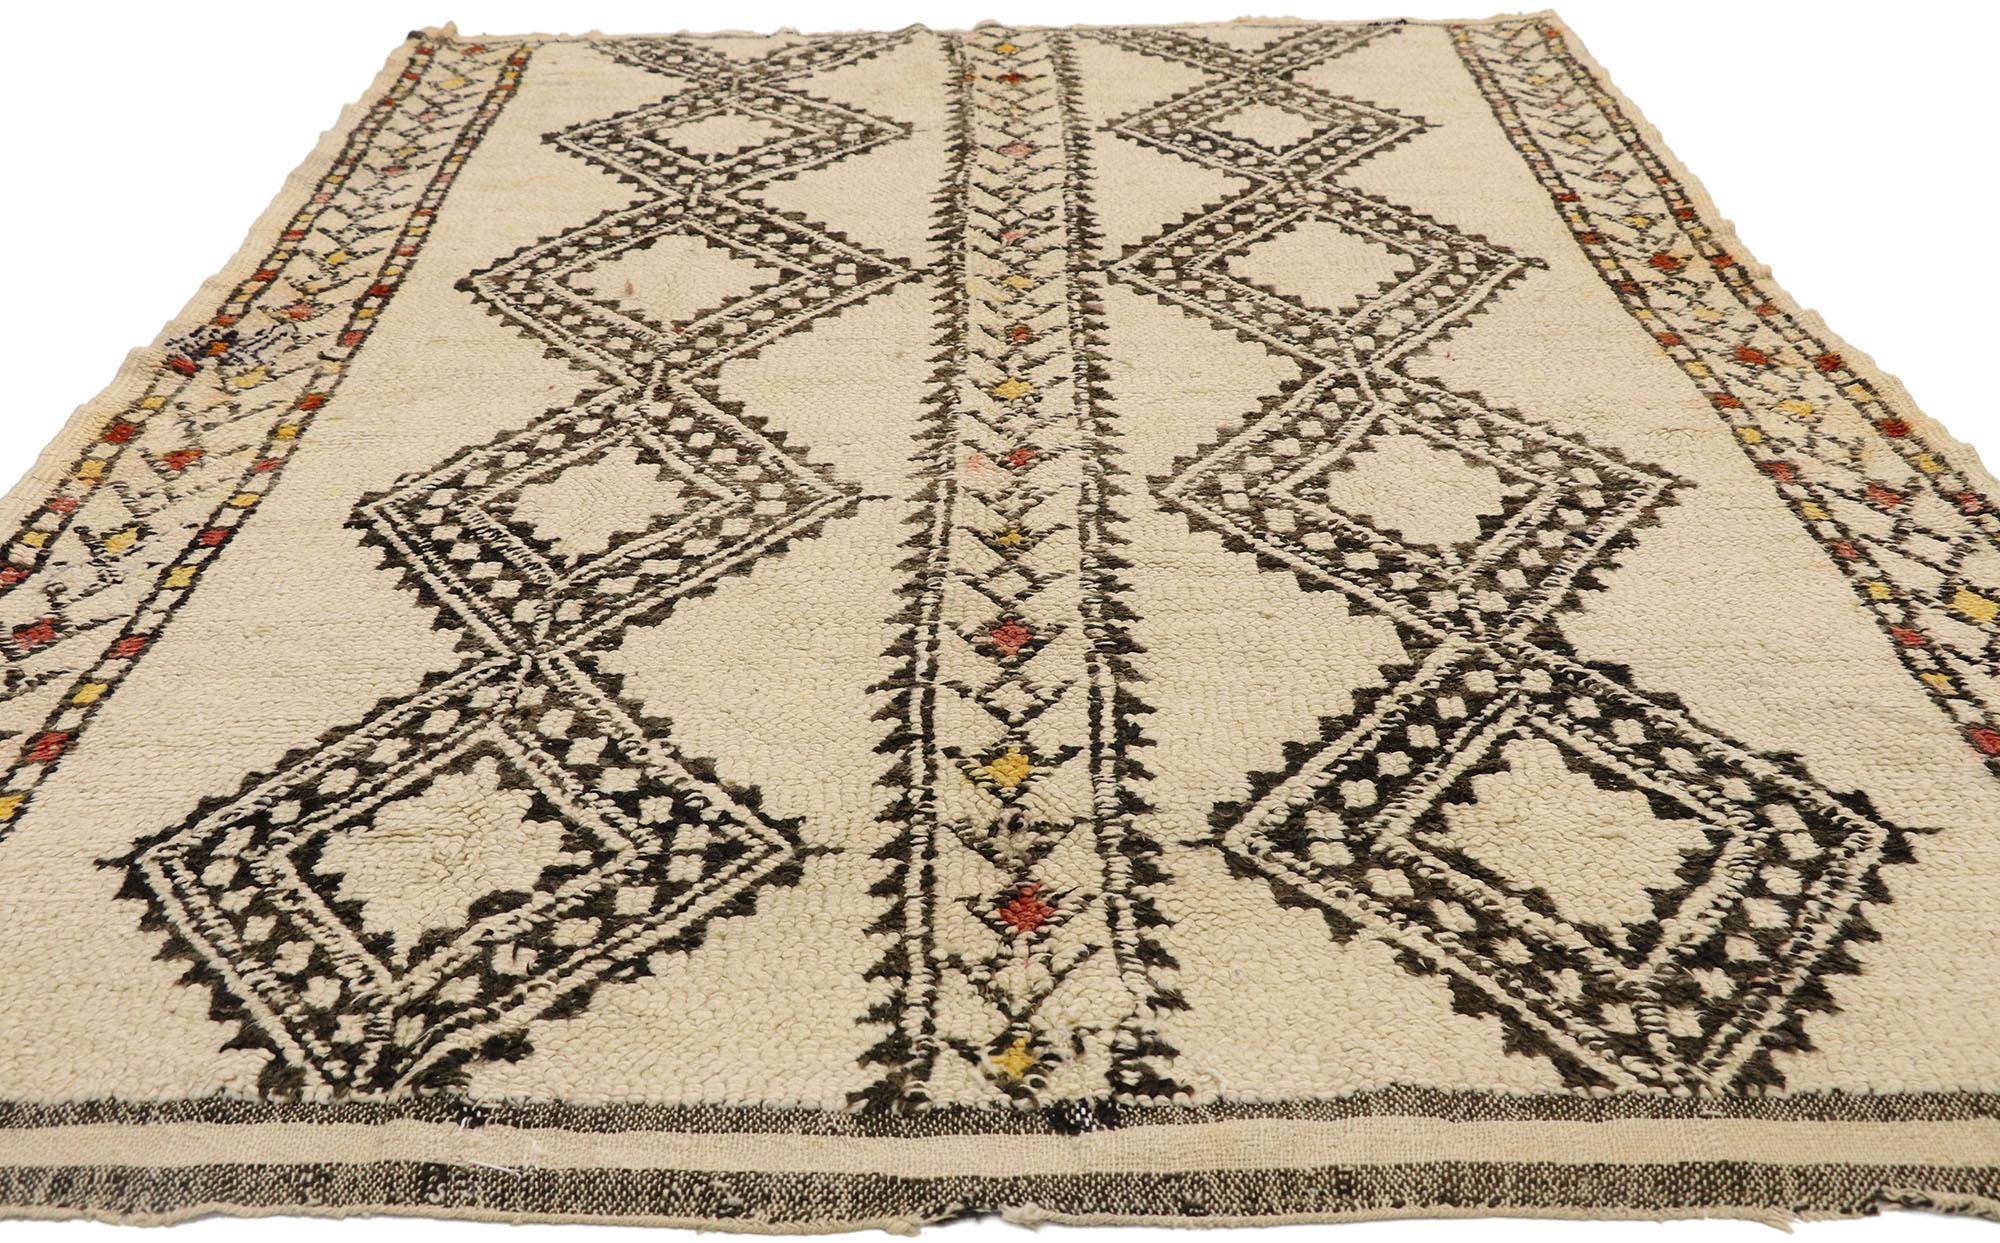 Hand-Knotted Vintage Beni Ourain Moroccan Rug with Mid-Century Modern Style and Hygge Vibes